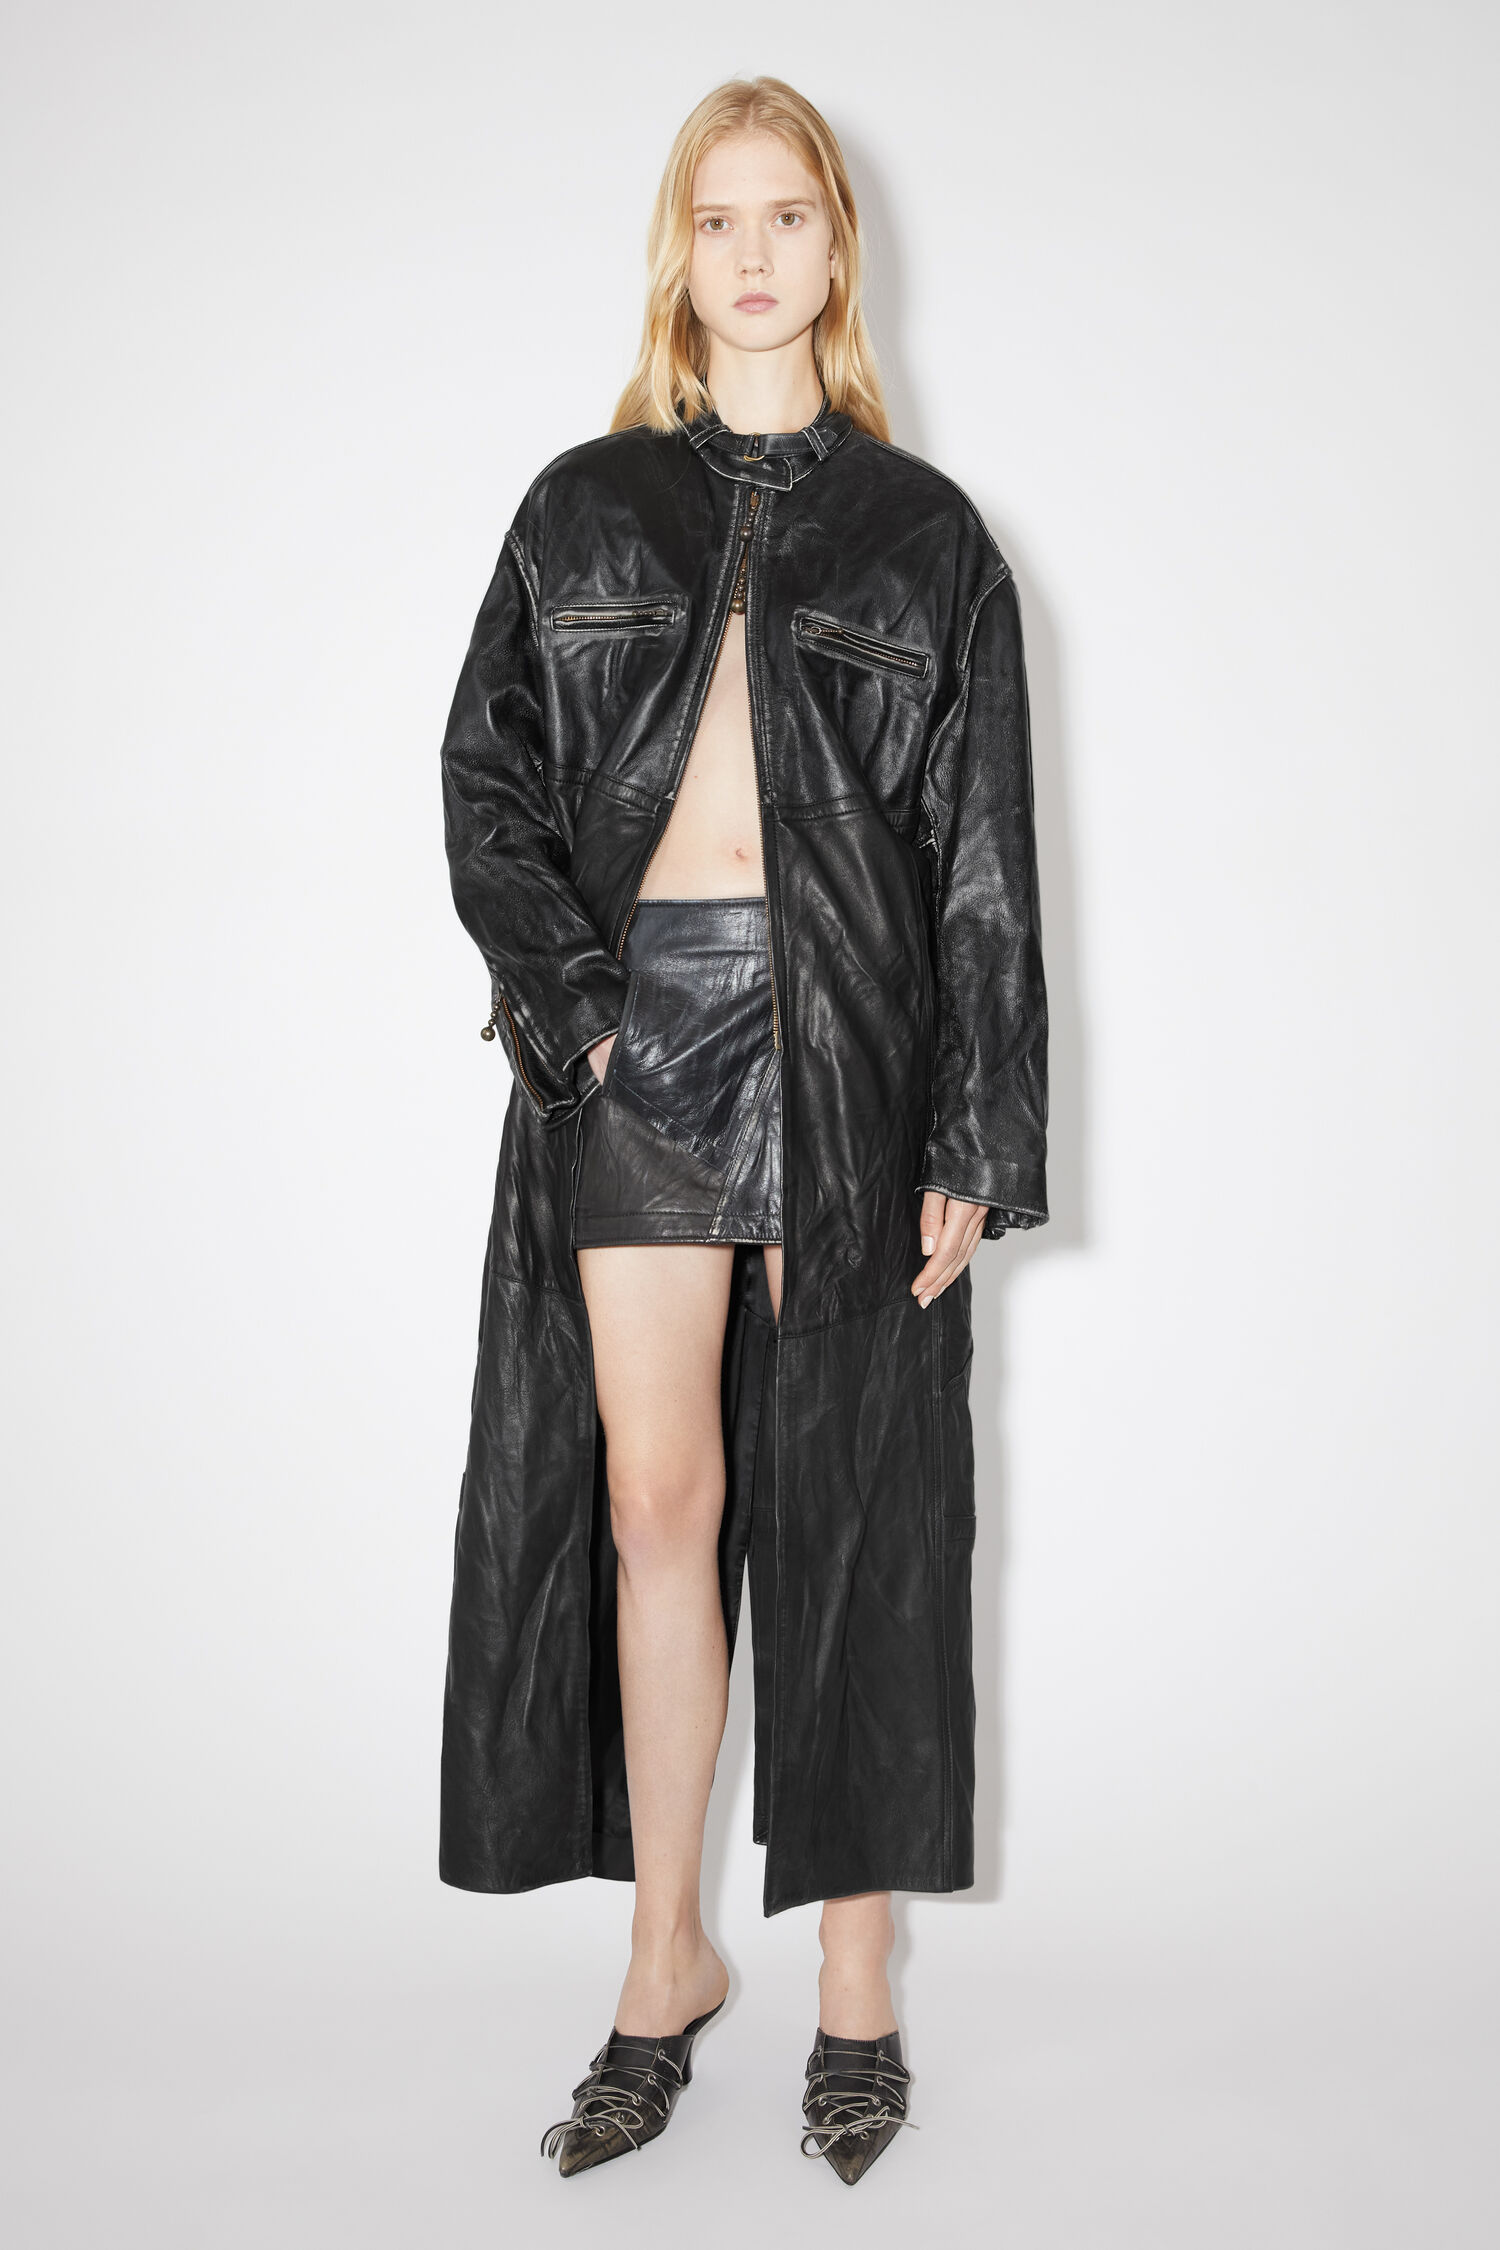 Acne Studios – Women's Leather and shearling jackets